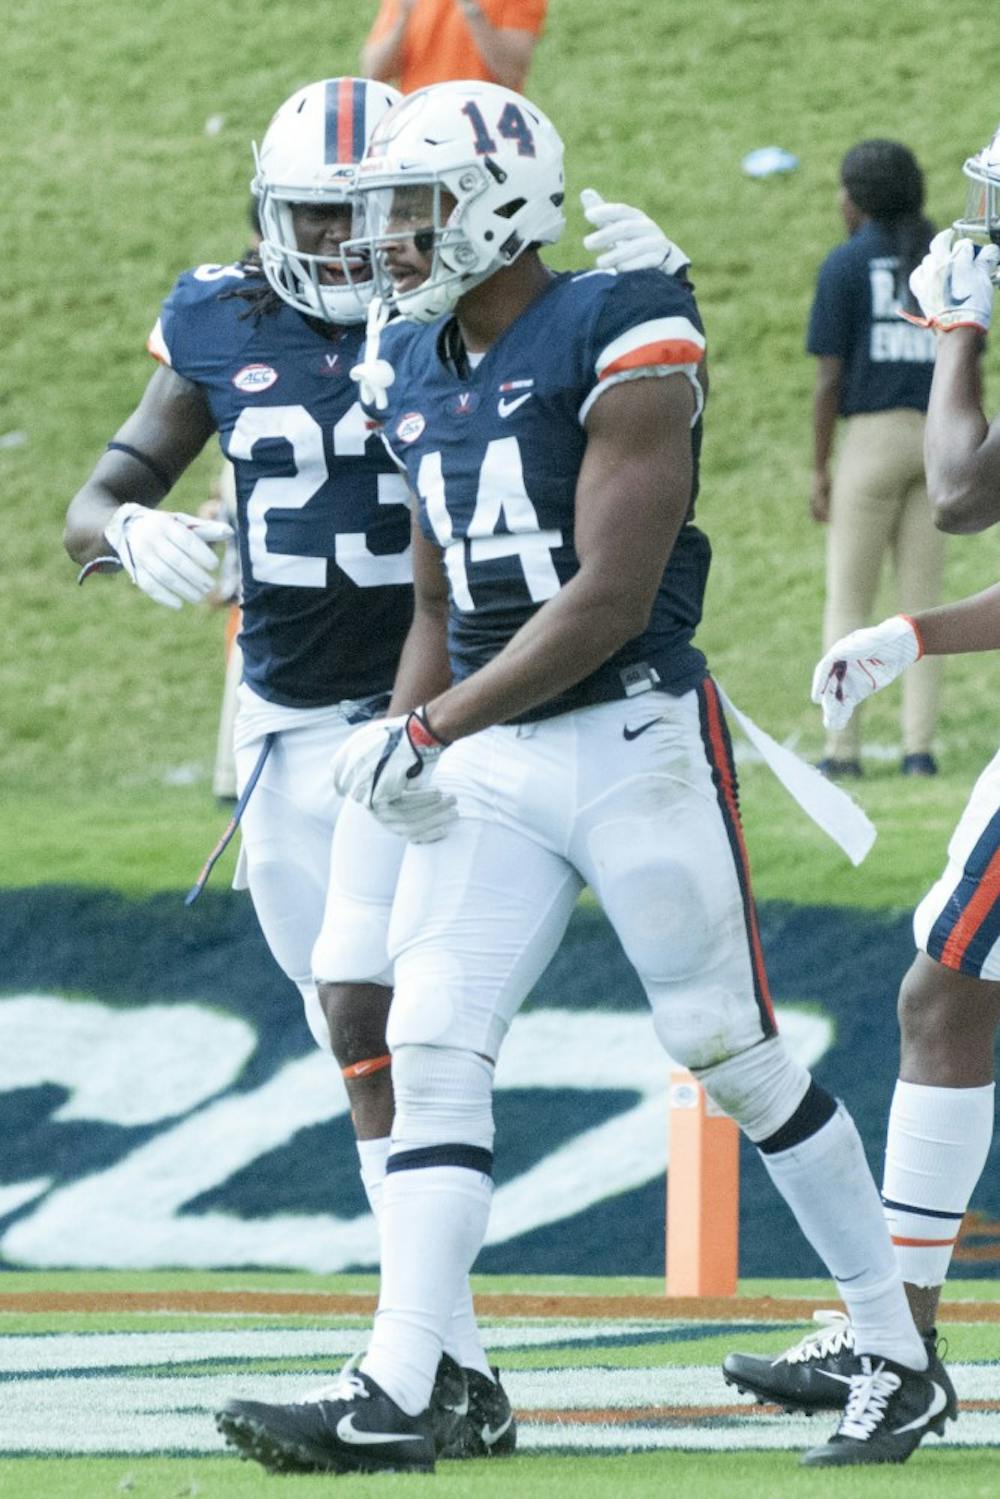 <p>Senior wide receiver Andre Levrone leads Virginia receivers with 348 yards and four touchdowns on 13 receptions.&nbsp;</p>